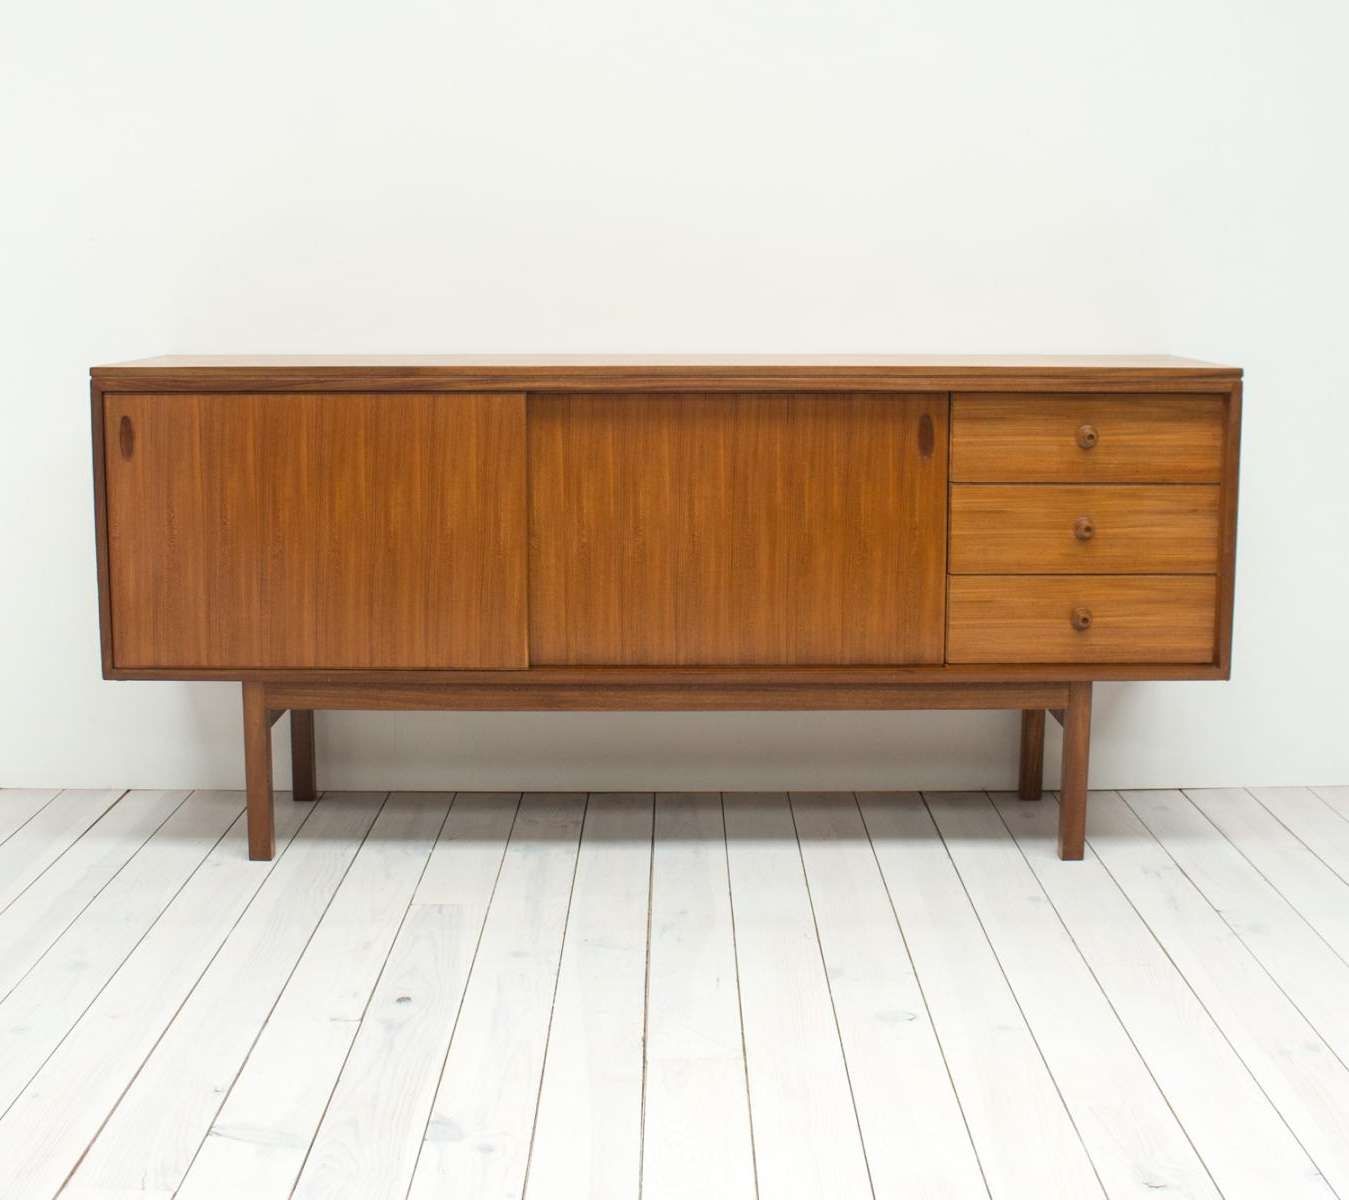 Mid Century Teak Sideboard From Gordon Russell For Sale At Pamono With Regard To Midcentury Sideboards (View 12 of 20)